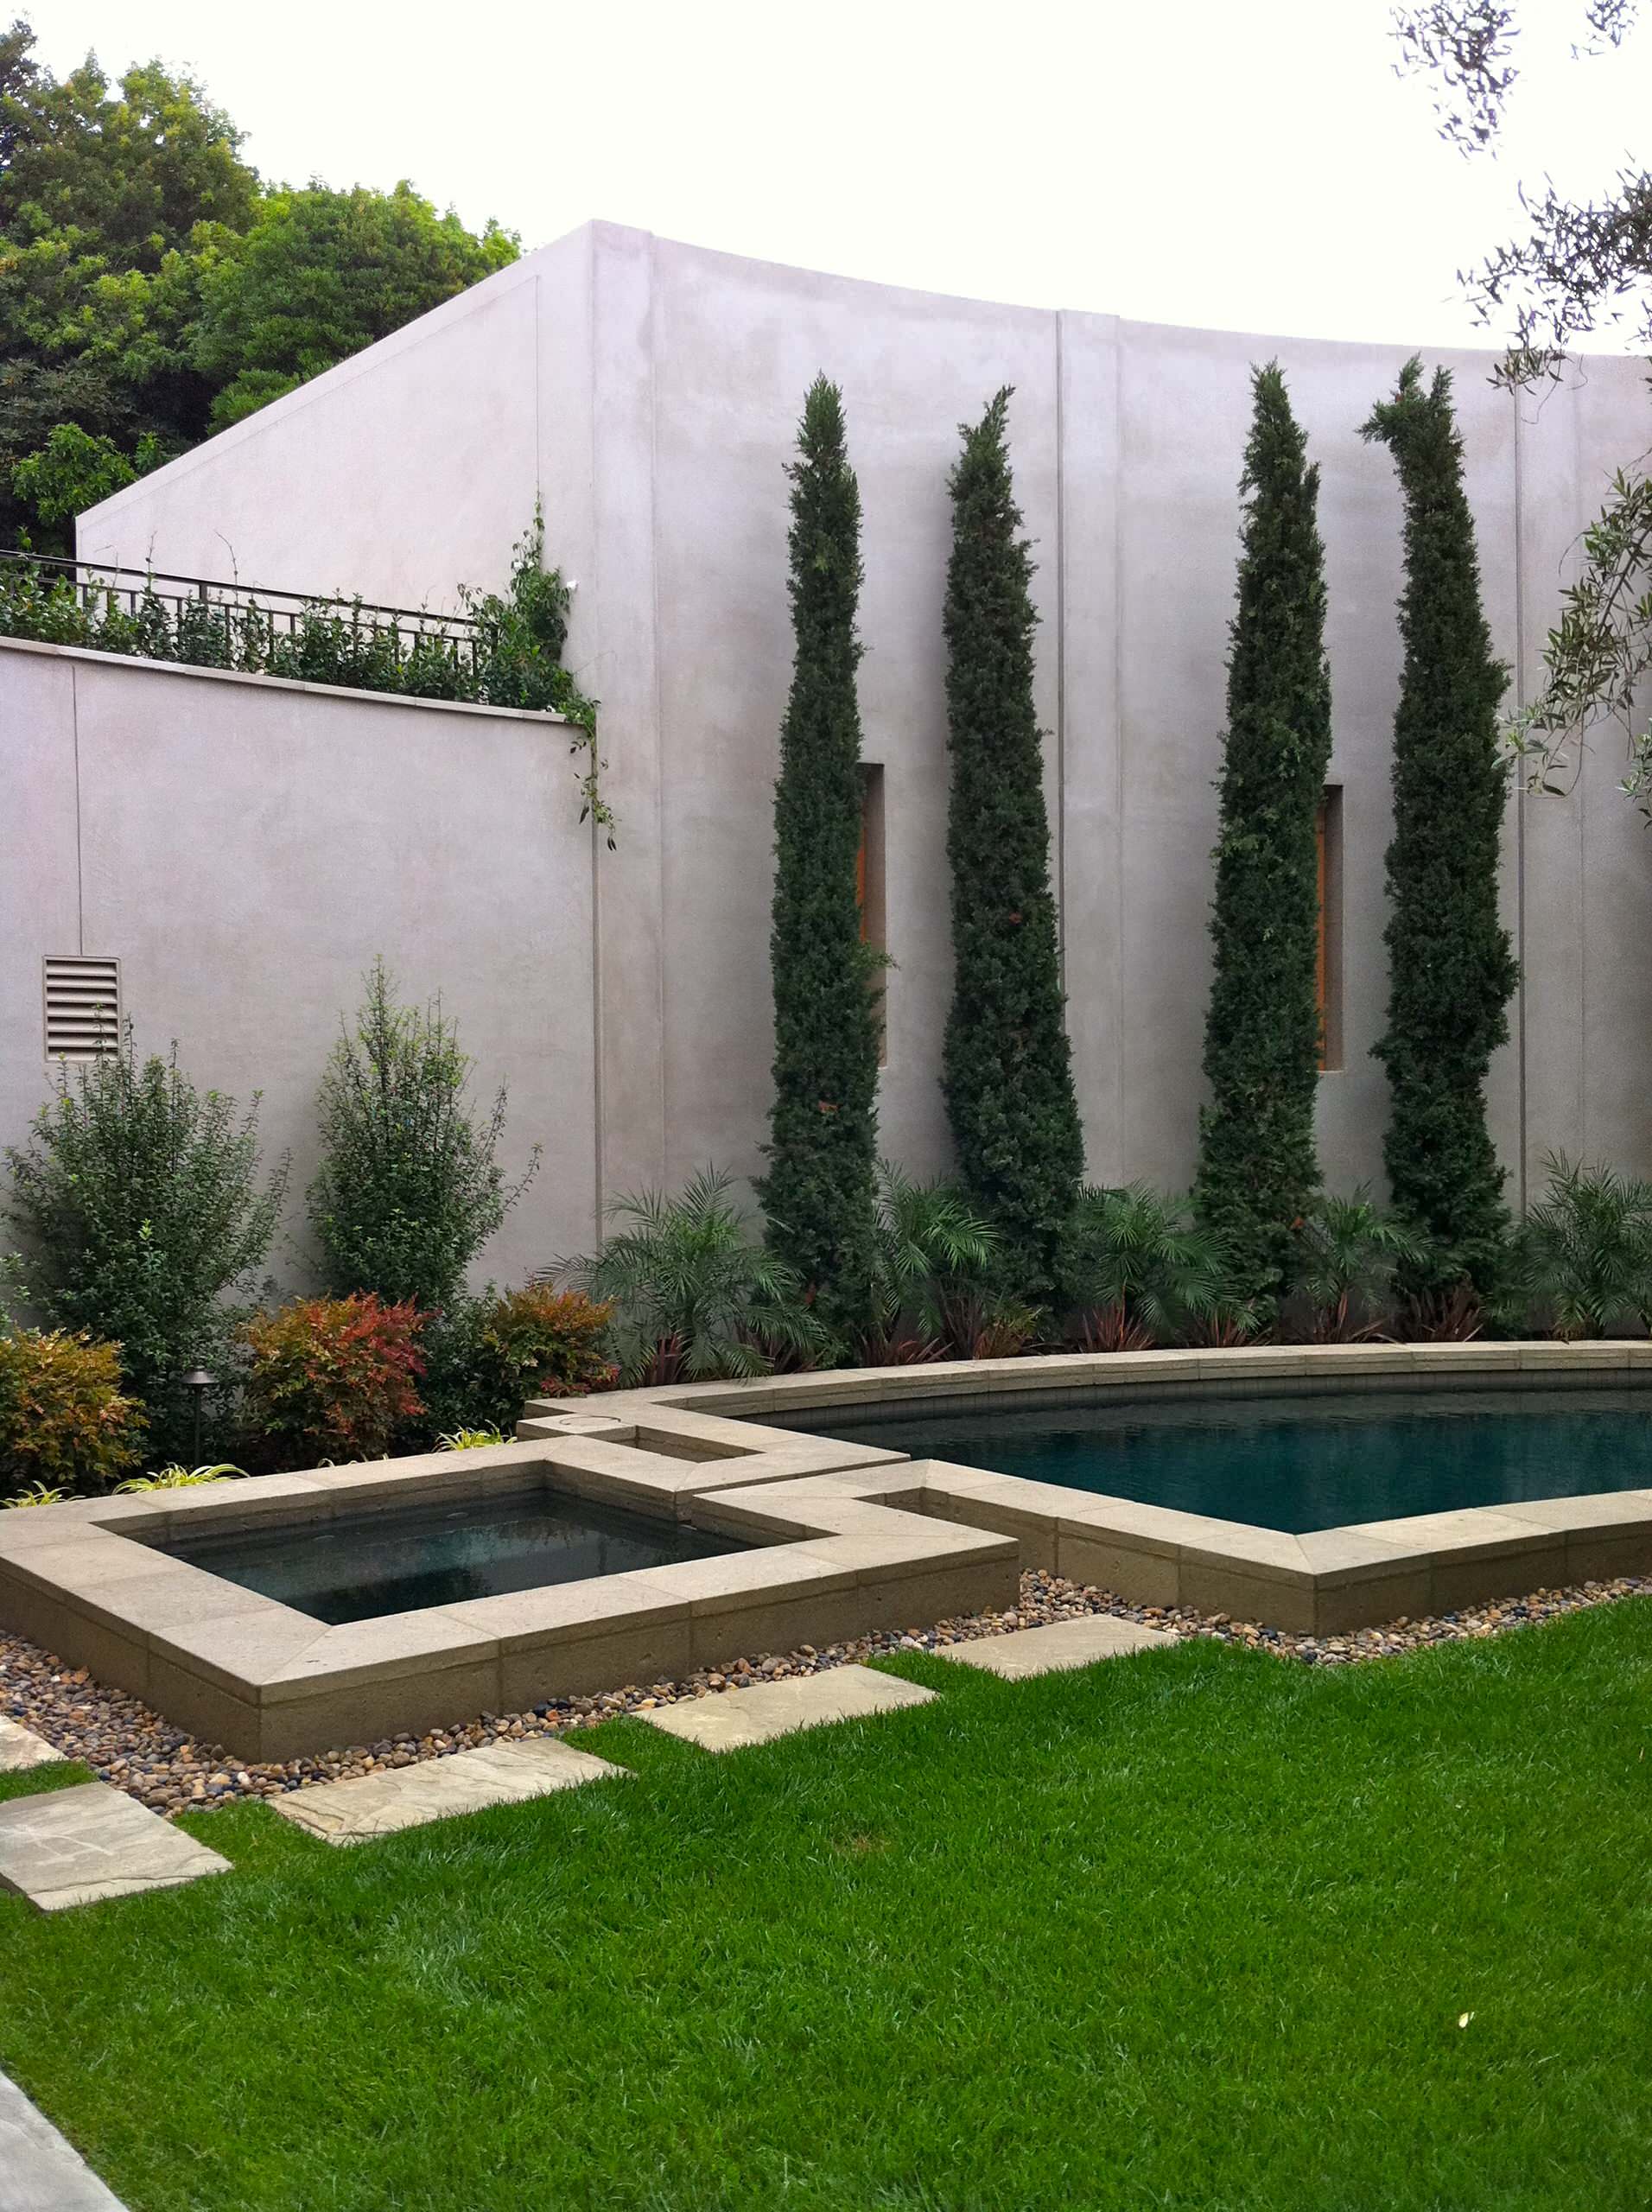 Contemporary La Jolla Landscape Architecture Courtyard Pool Italian Cypress Contemporary Pool San Diego By The Design Build Company Houzz